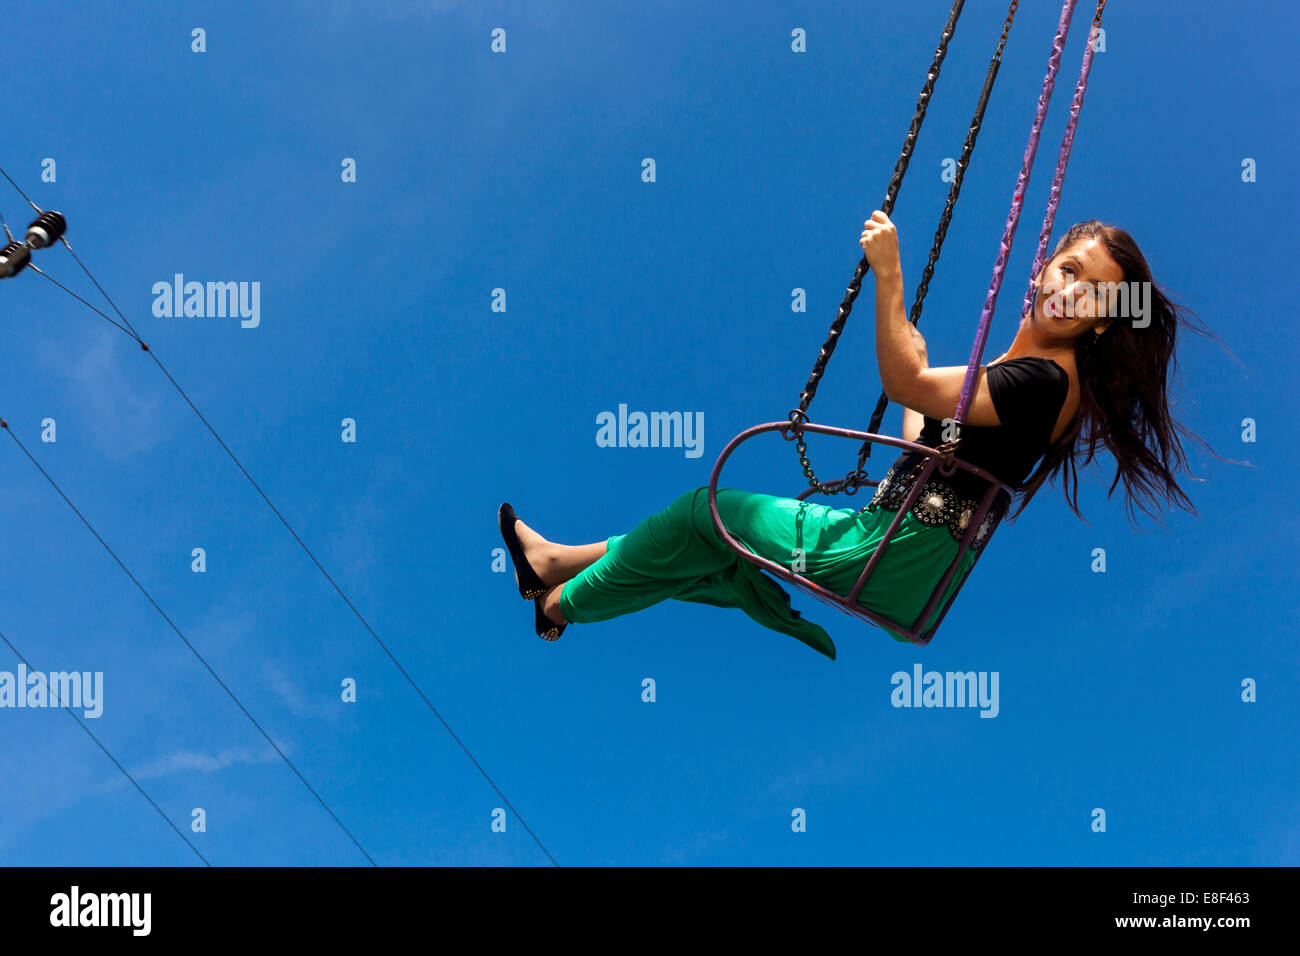 Young woman on the chain swing carousel Stock Photo